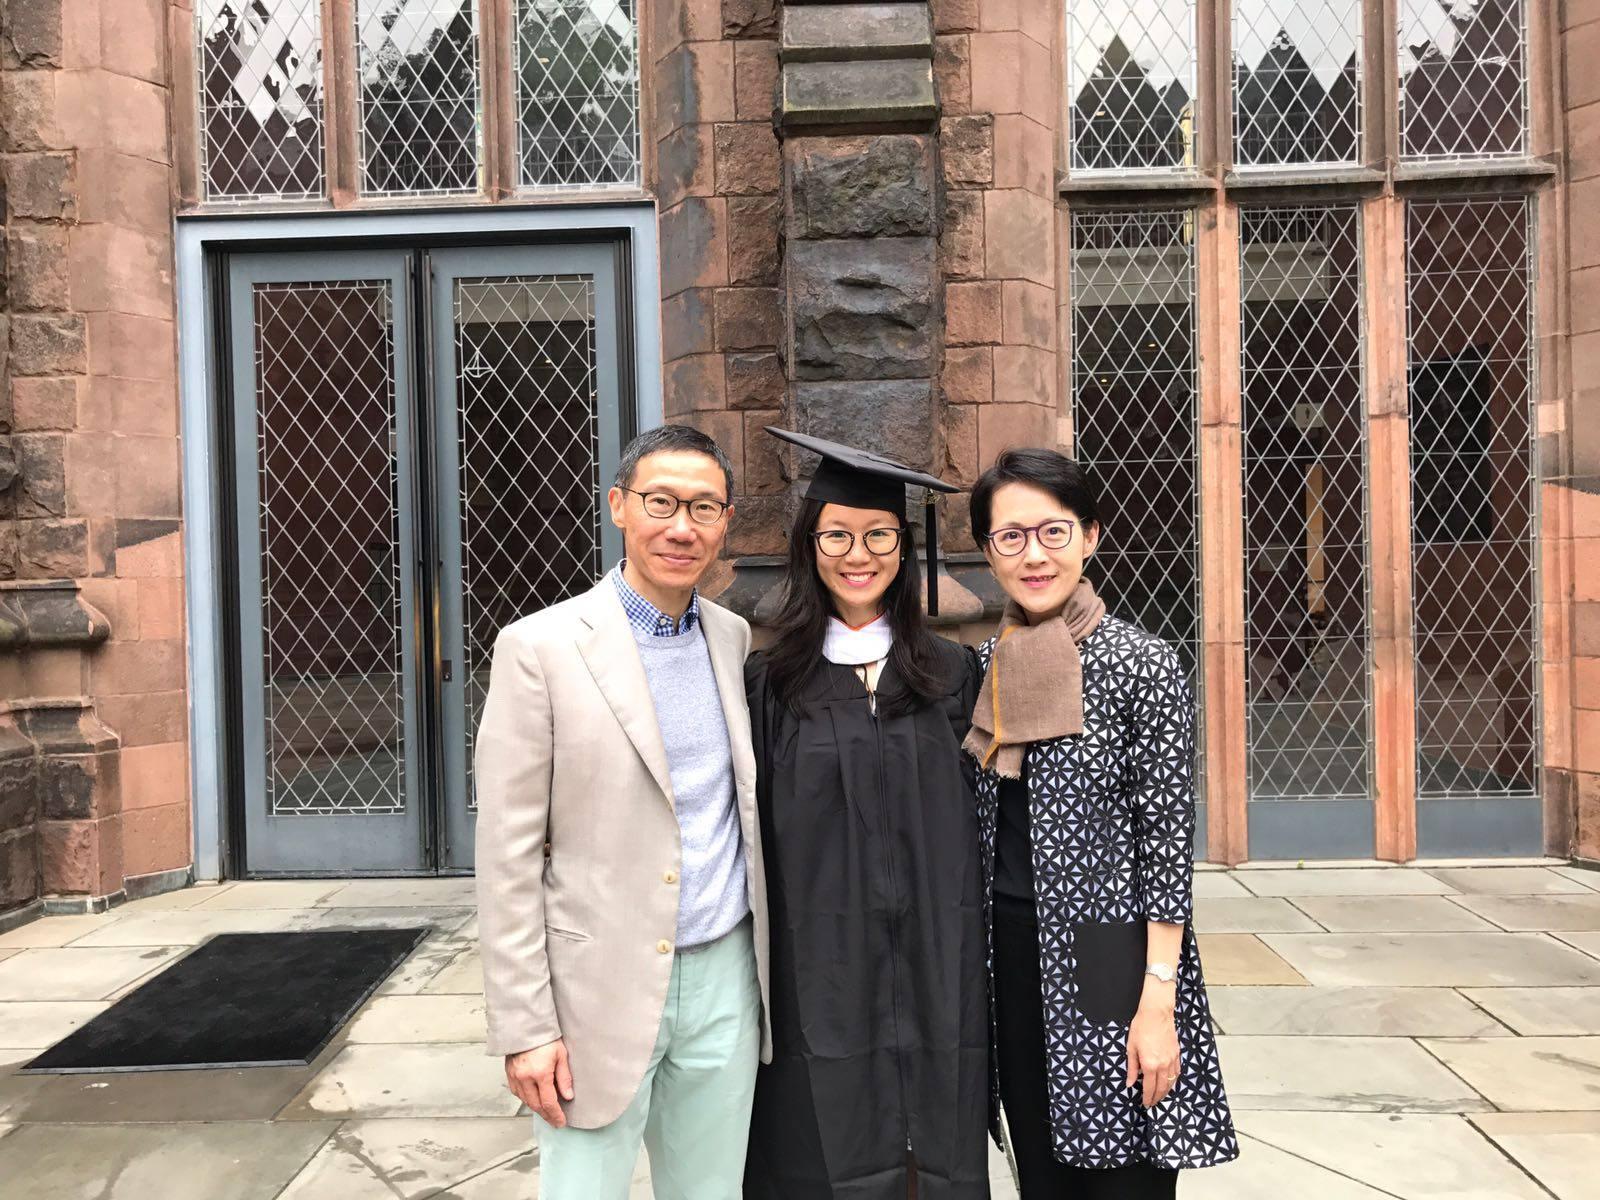 Jin Yun Chow with her family at Princeton University